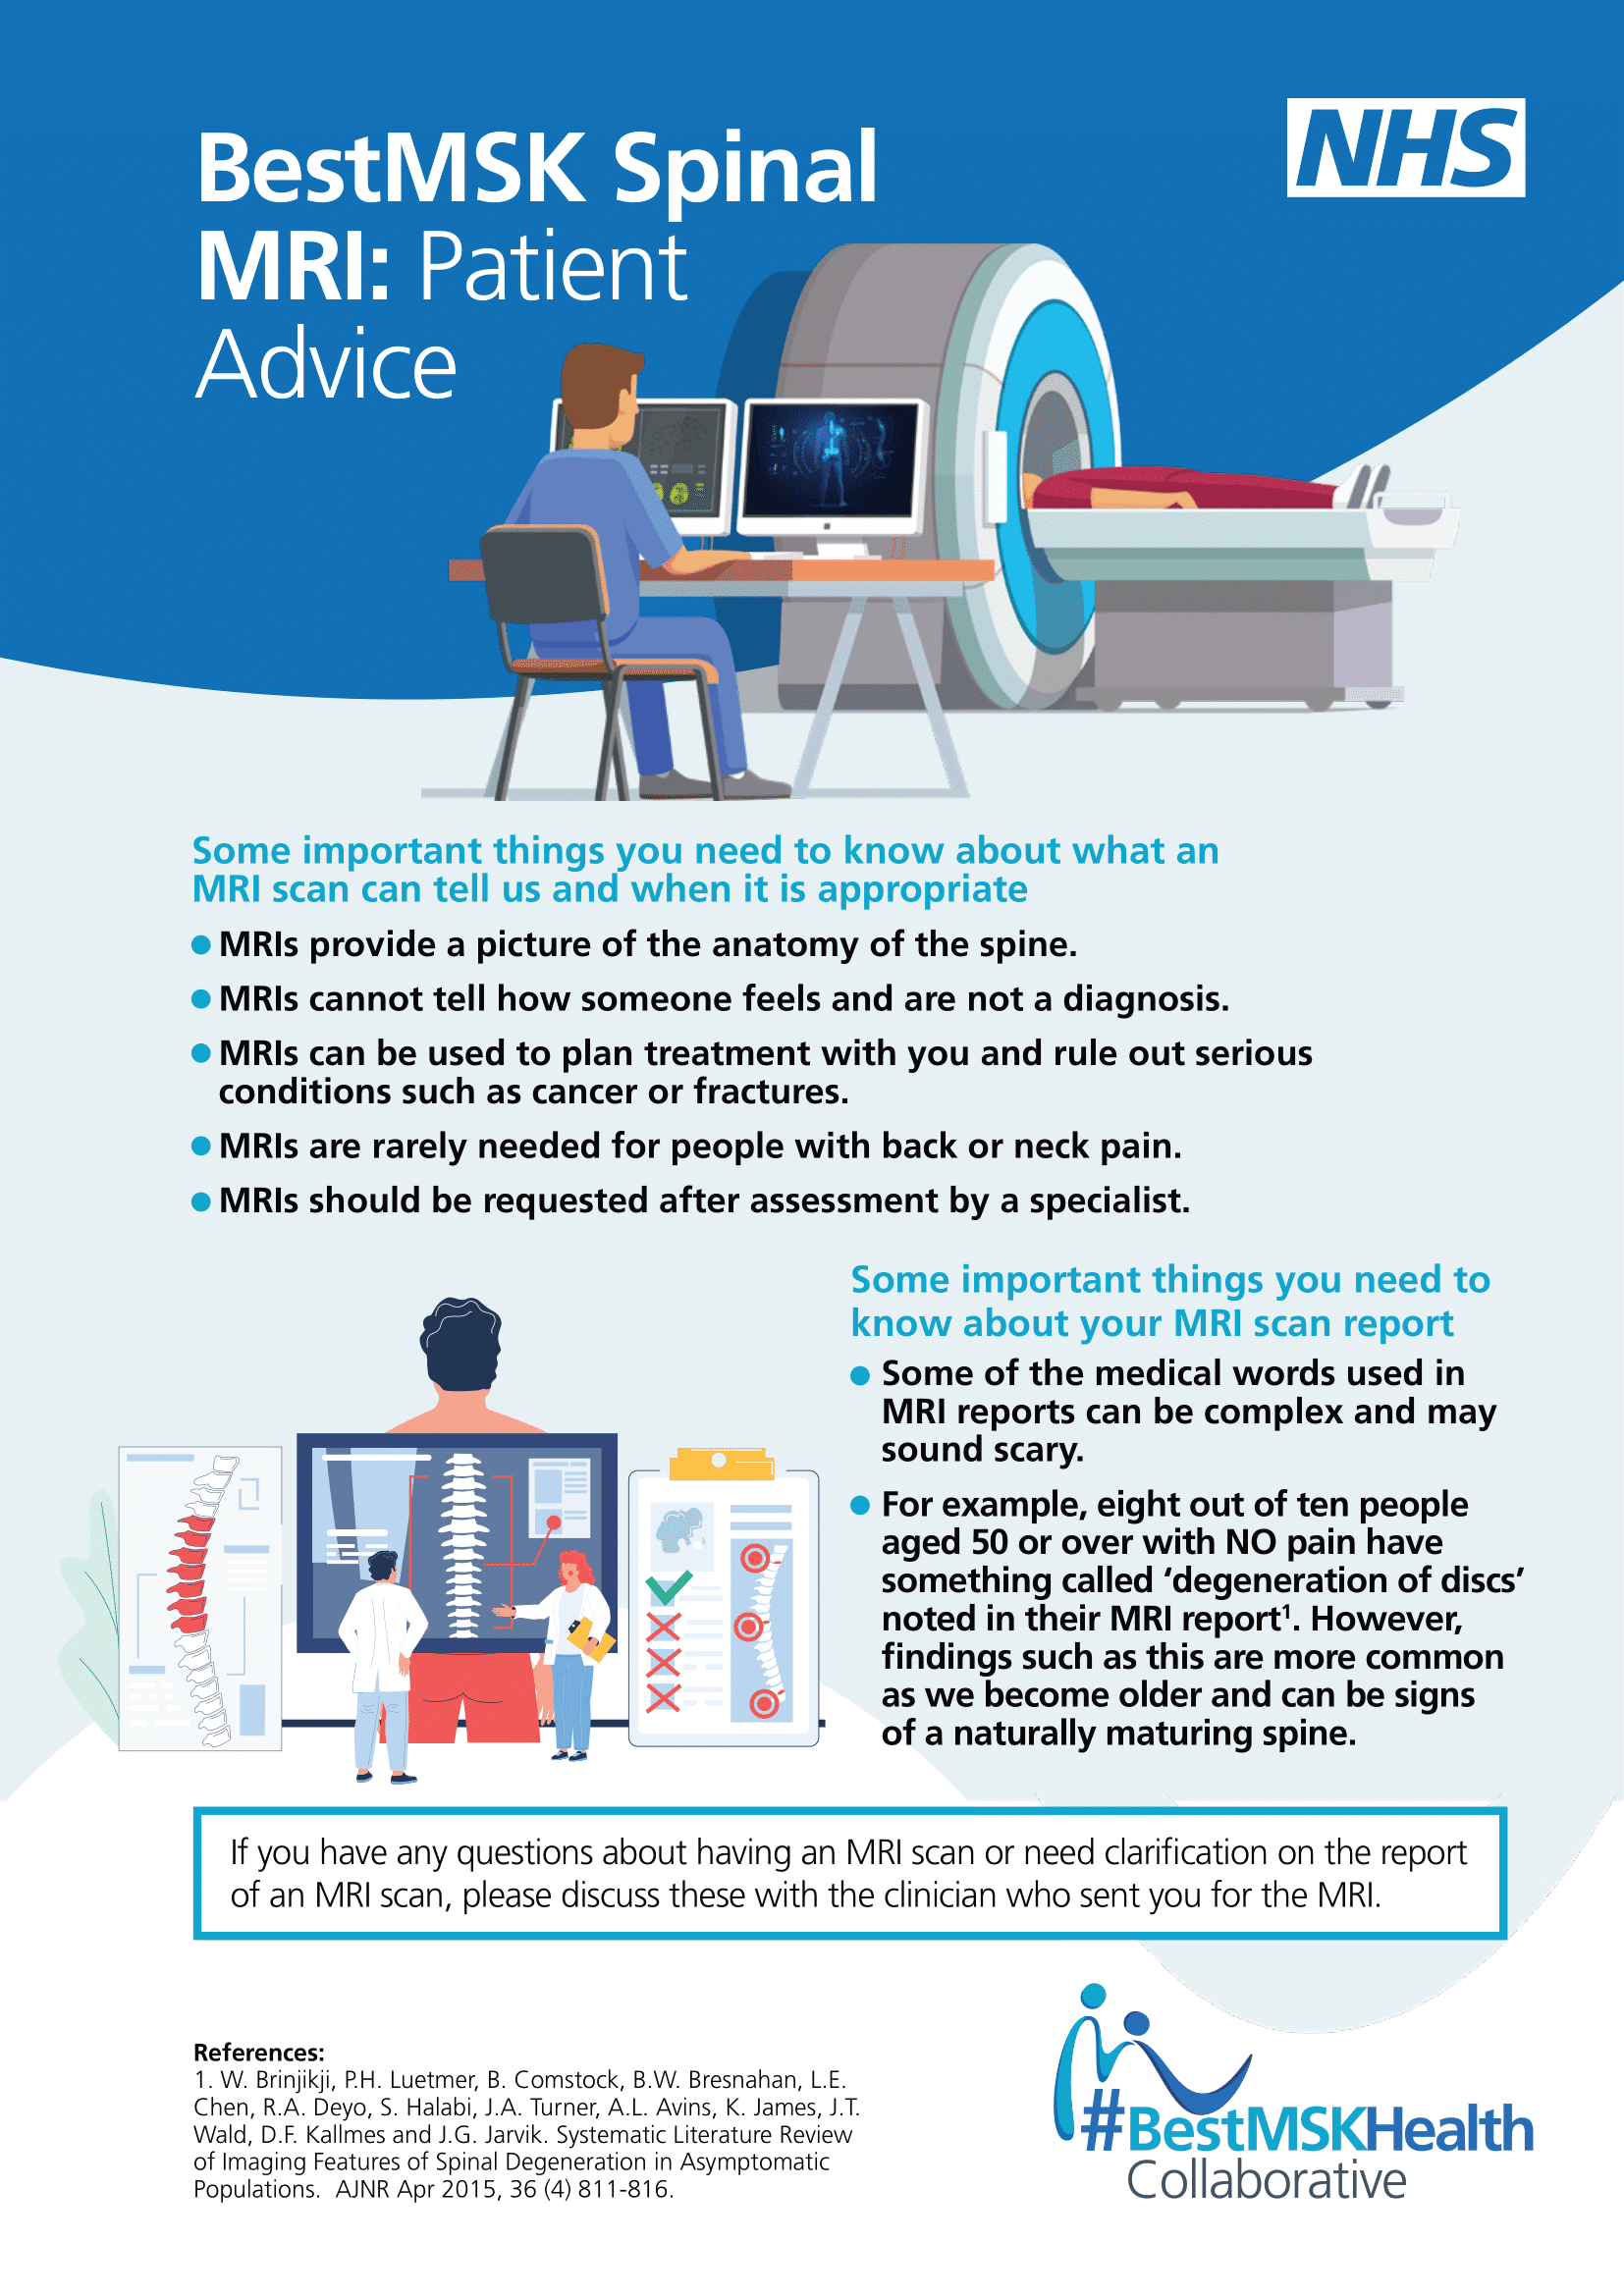 Image of a patient advice leaflet called BestMSK Spinal MRI